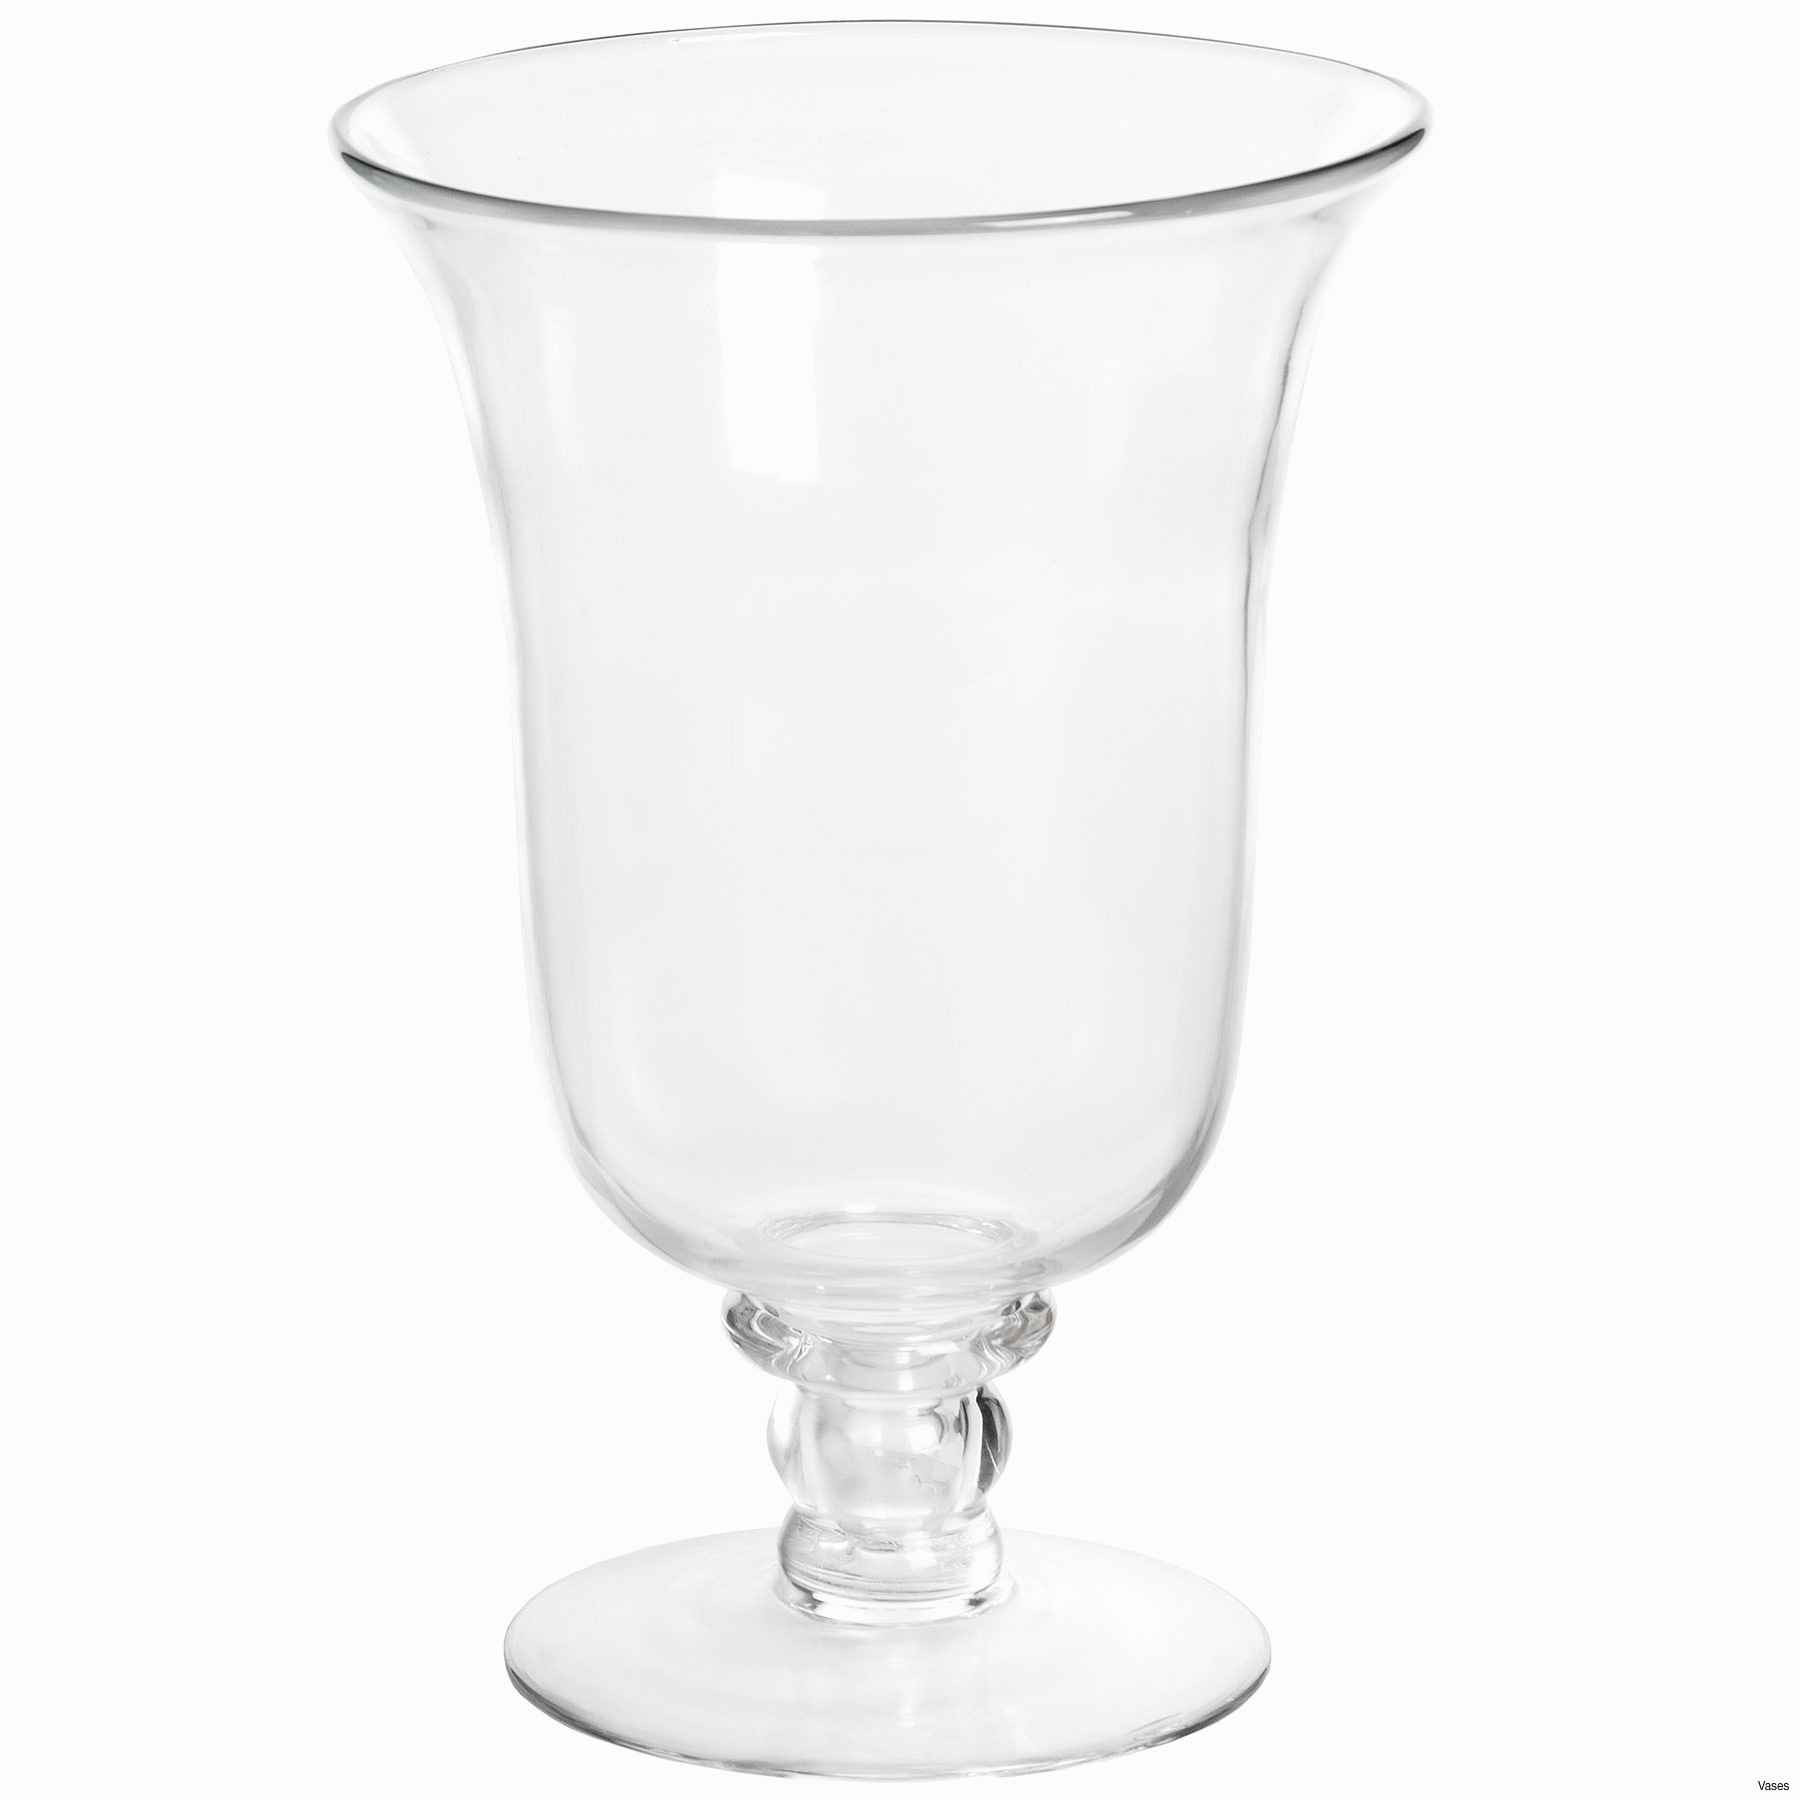 19 Fabulous Tall White Glass Vase 2024 free download tall white glass vase of candle stands wholesale lovely faux crystal candle holders alive with regard to candle stands wholesale lovely faux crystal candle holders alive vases gold tall jpgi